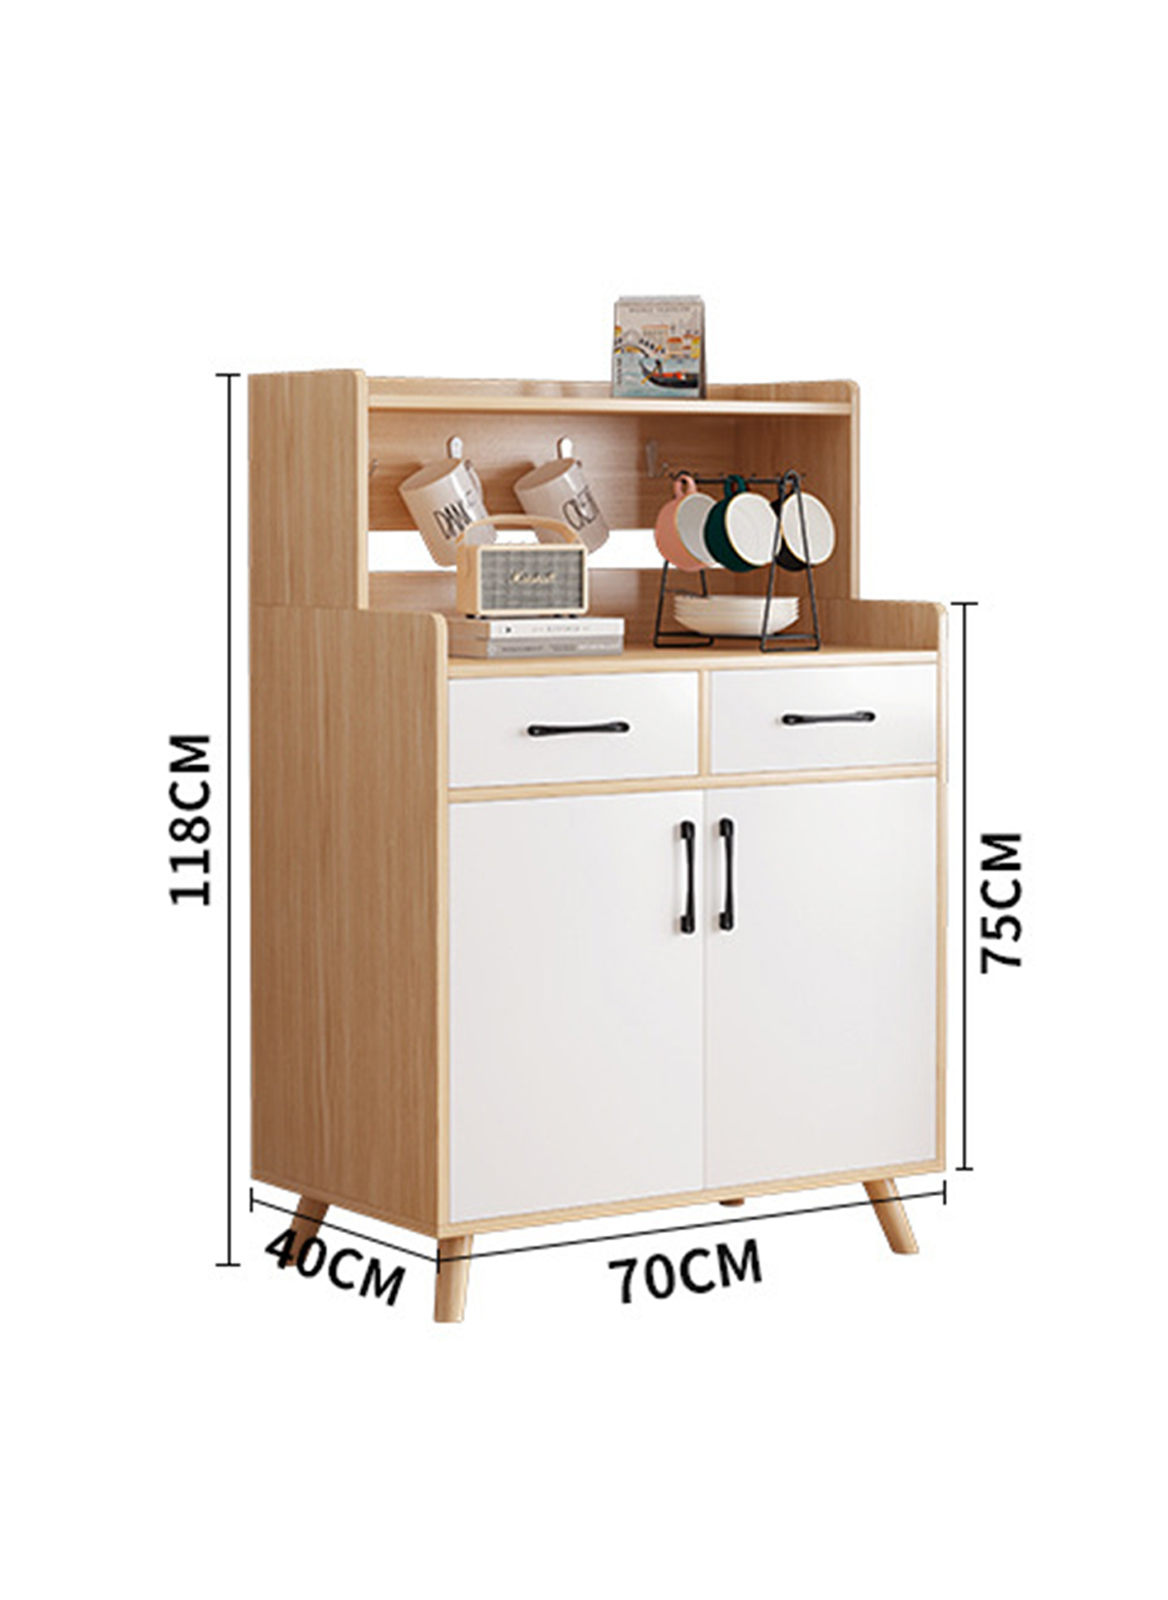 Kitchen Cabinet,Home Multifunctional Kitchen Dining Room Simple Storage Cabinet,Living Room Porch Cabinet,White